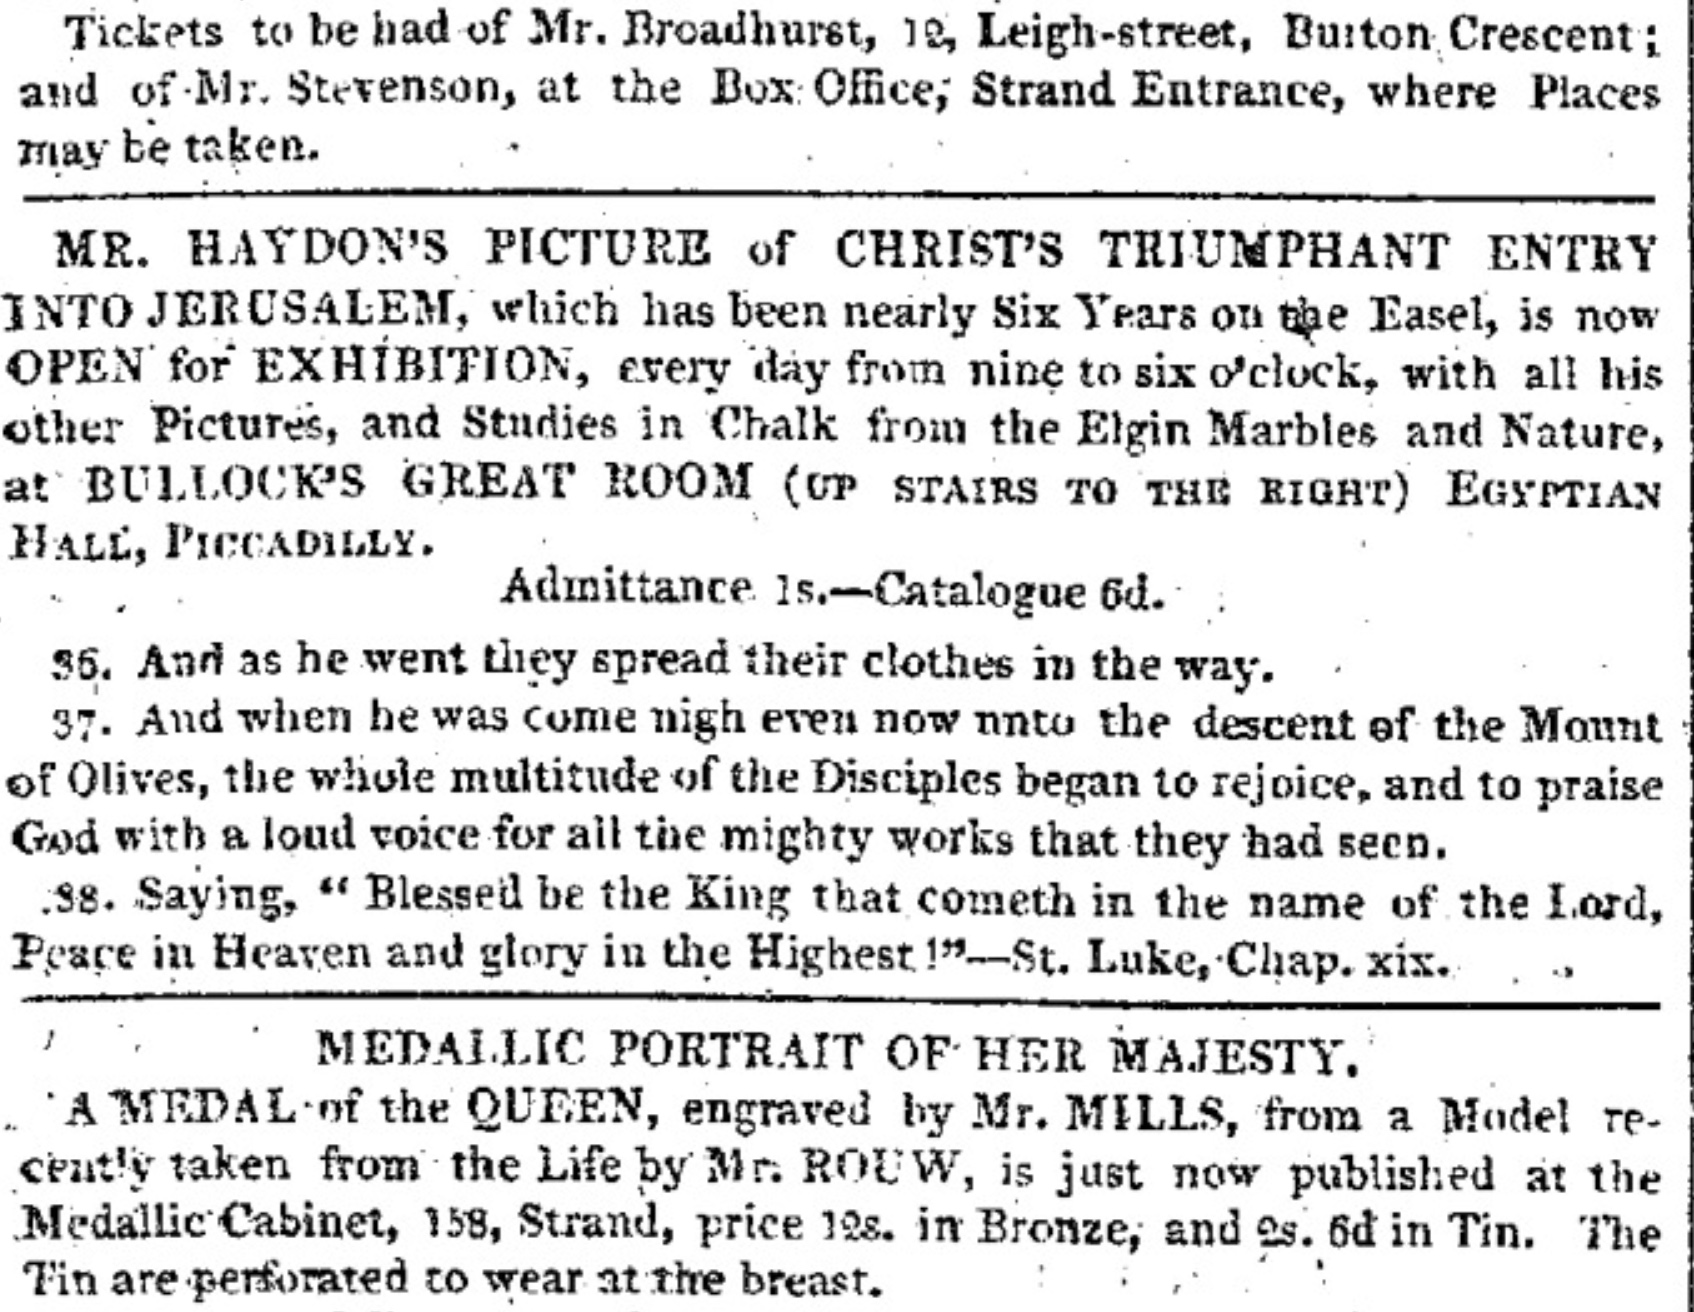 Six Years on the Easel: Haydon’s Christ’s Triumphant
          Entry into Jerusalem,
        The Examiner, 1 Oct 1820 (click to enlarge)